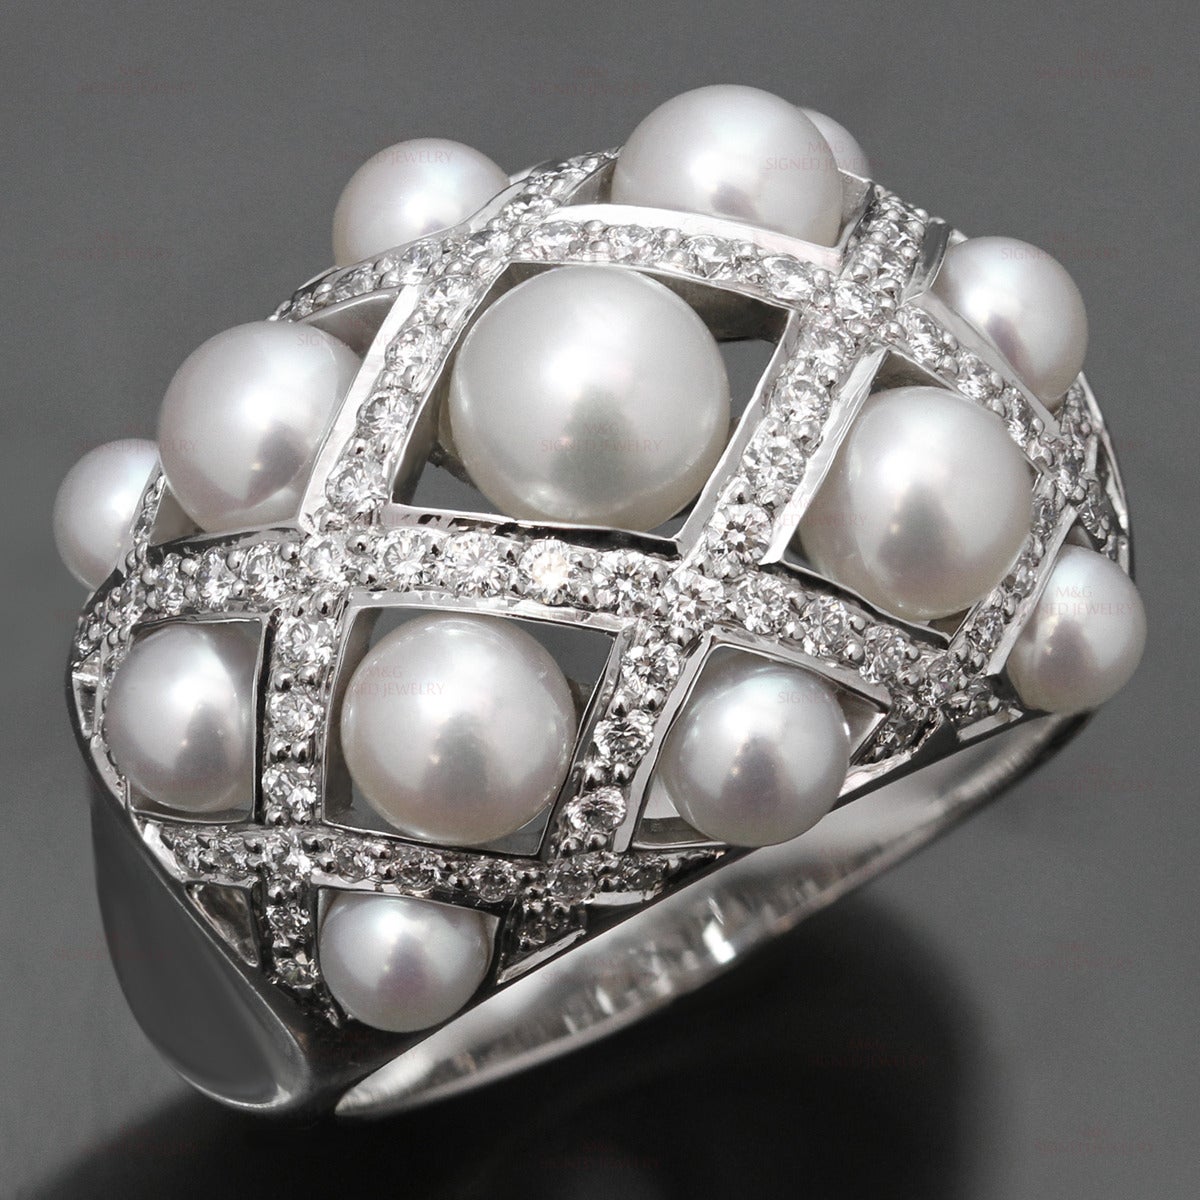 This magnificent domed Chanel ring from the Matelasse collection is crafted in 18k white gold and set with 13 cultured pearls measuring between 3.0mm to 6.0mm in diameter, accented with pave-set round brilliant-cut E-F VVS1-VVS2 diamonds of an